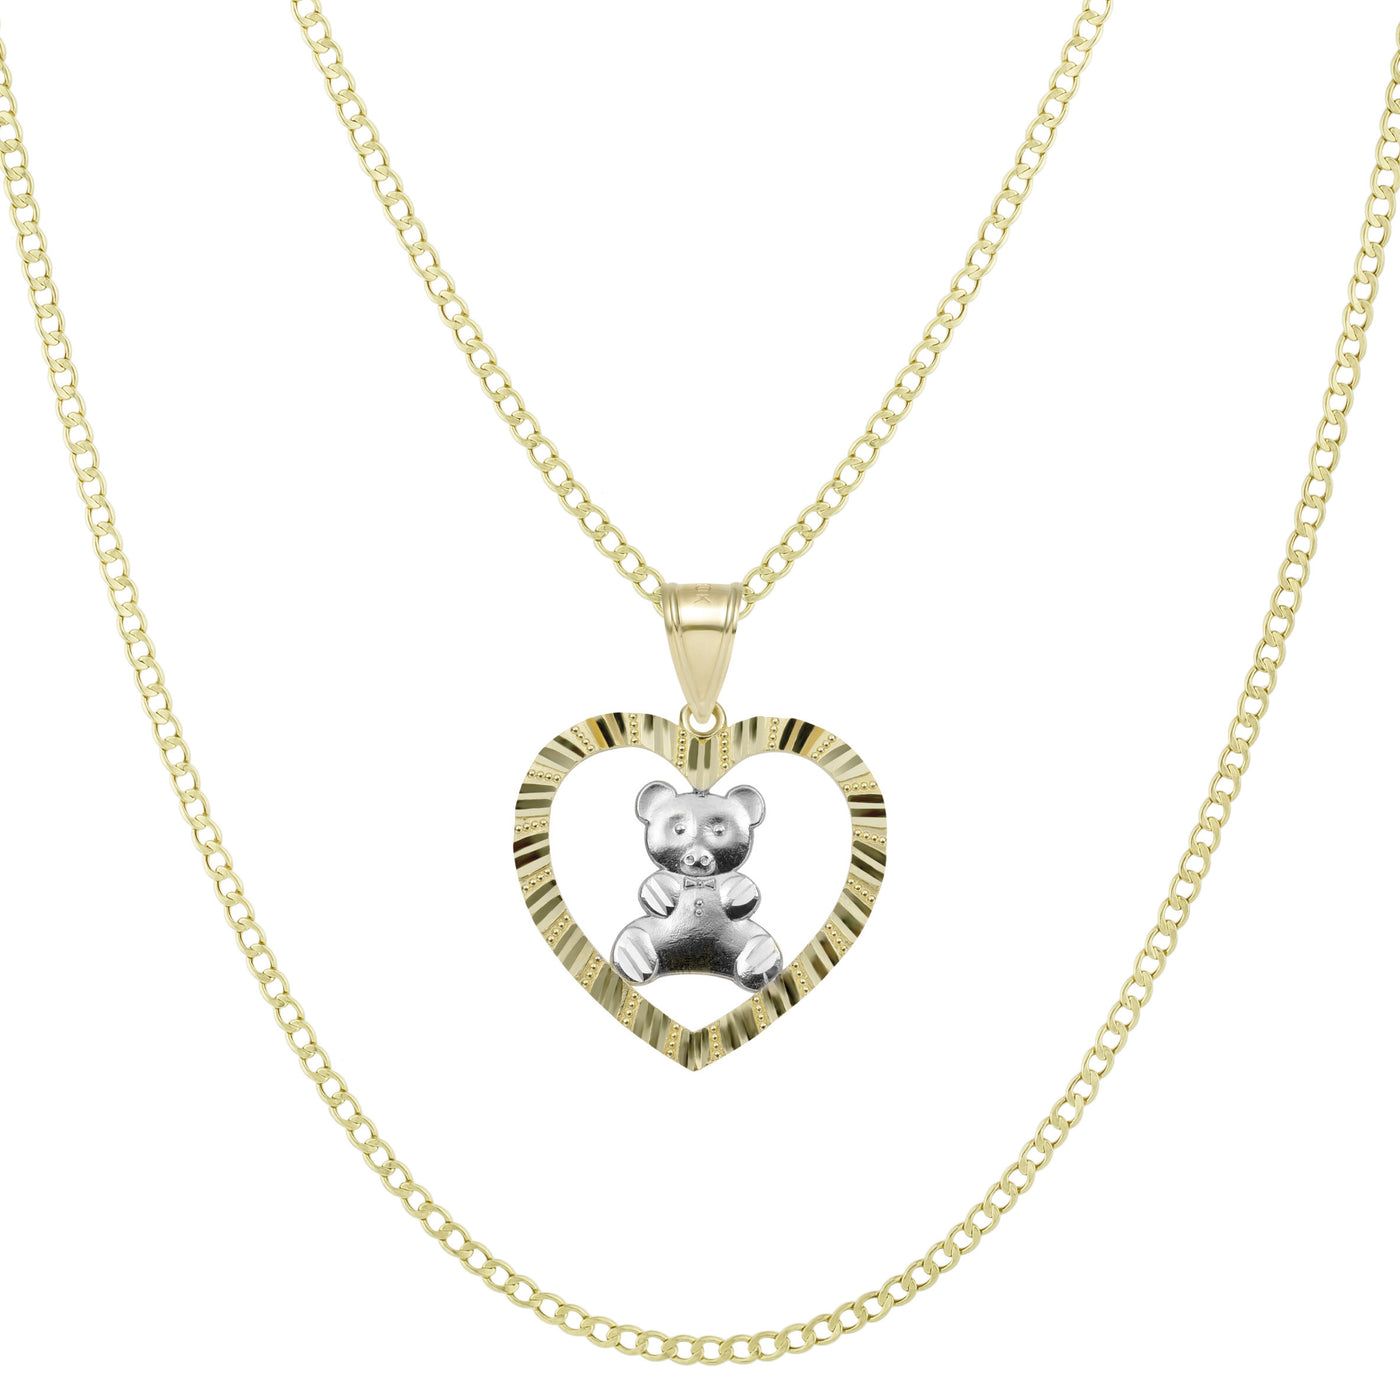 1 1/2" Teddy Bear in Heart Pendant & Chain Necklace Set 10K Yellow White Gold